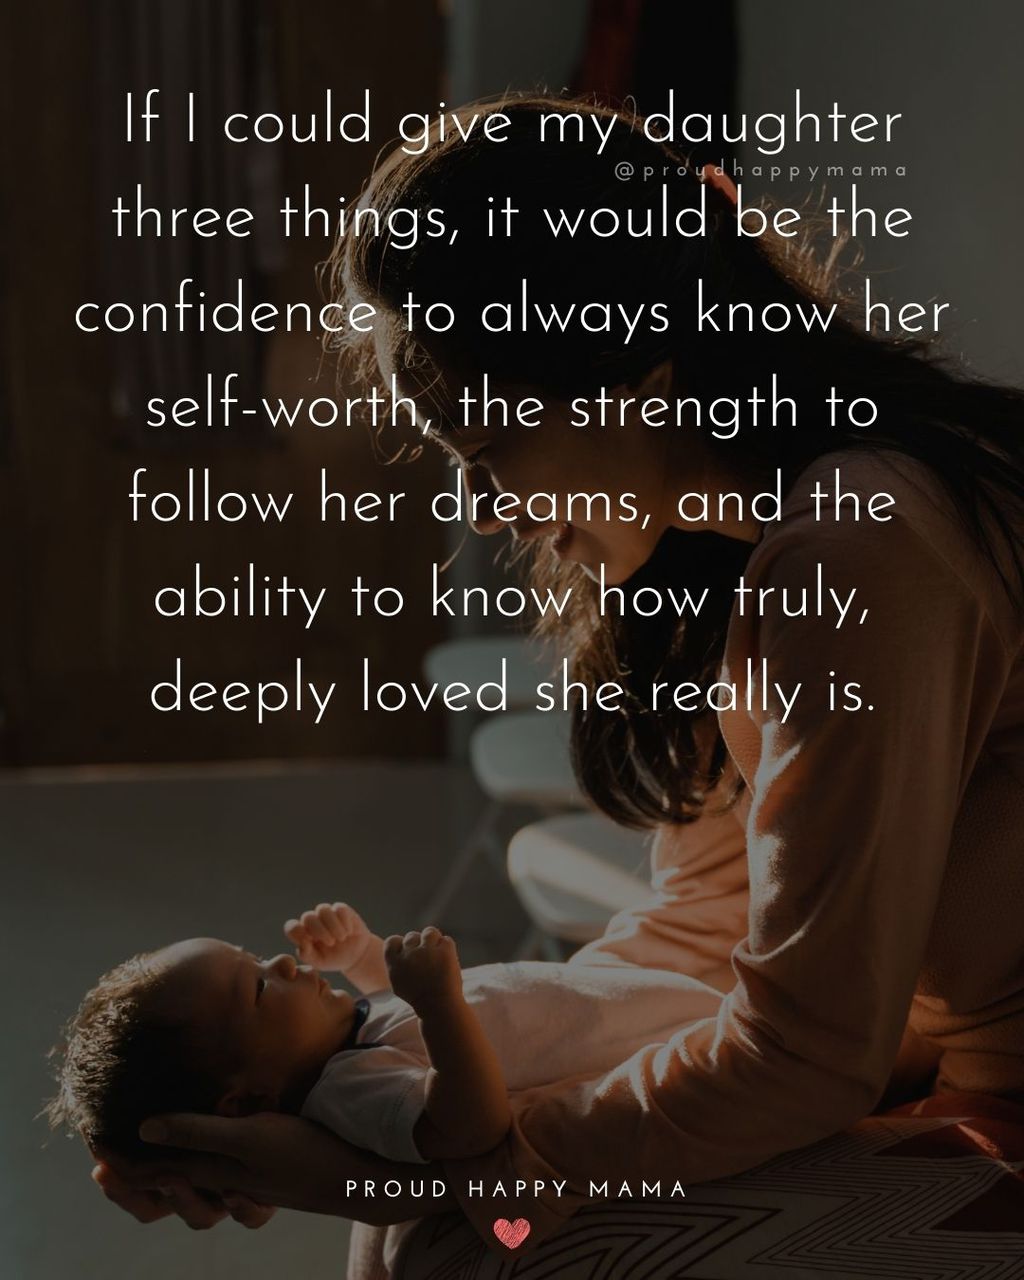 Baby Girl Quotes - If I could give my daughter three things, it would be the confidence to always know her self-worth, the strength to follow her dreams, and the ability to know how truly, deeply loved she really is.